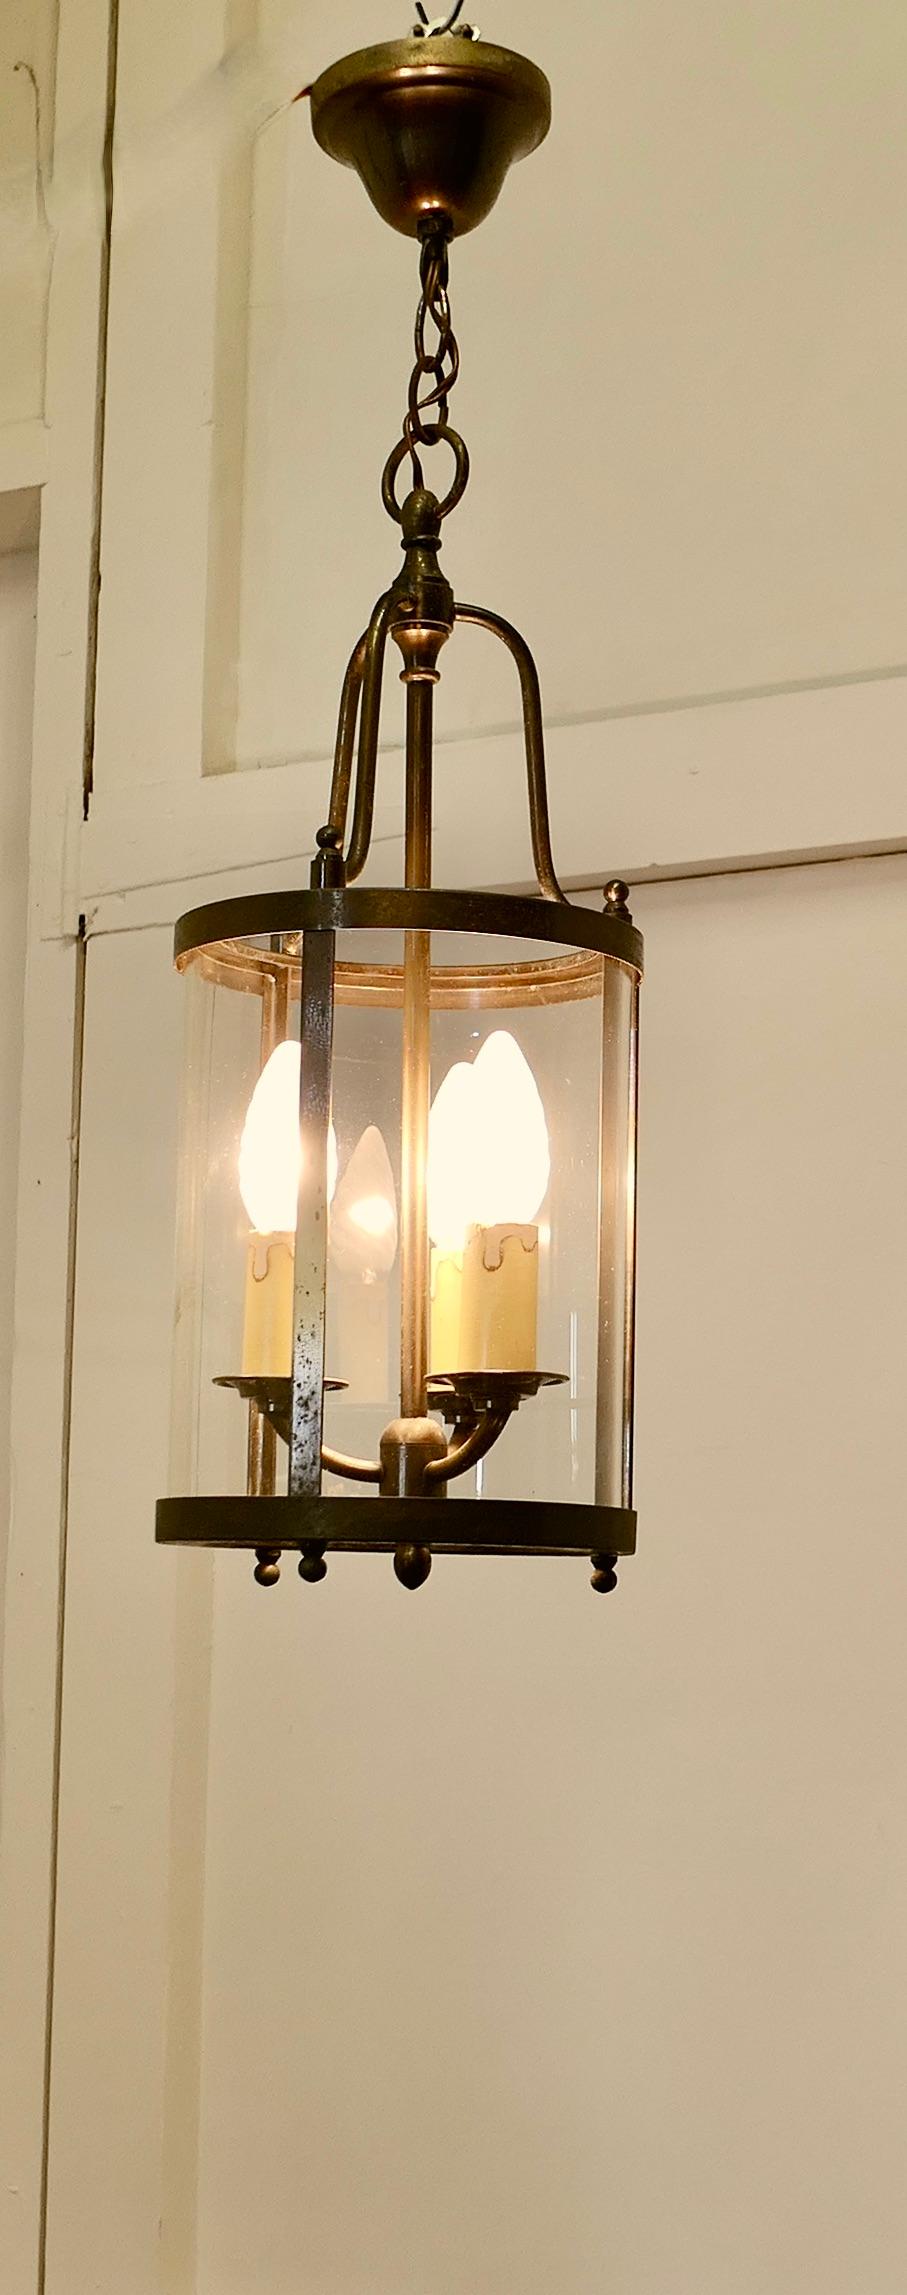 French Brass and Glass Lantern Hall Light

A traditional lantern, the light has a cylindrical glass shade, and a twin light fitting to the interior it hangs on a chain from a brass ceiling rose
The lantern gives a sensational bright light when lit